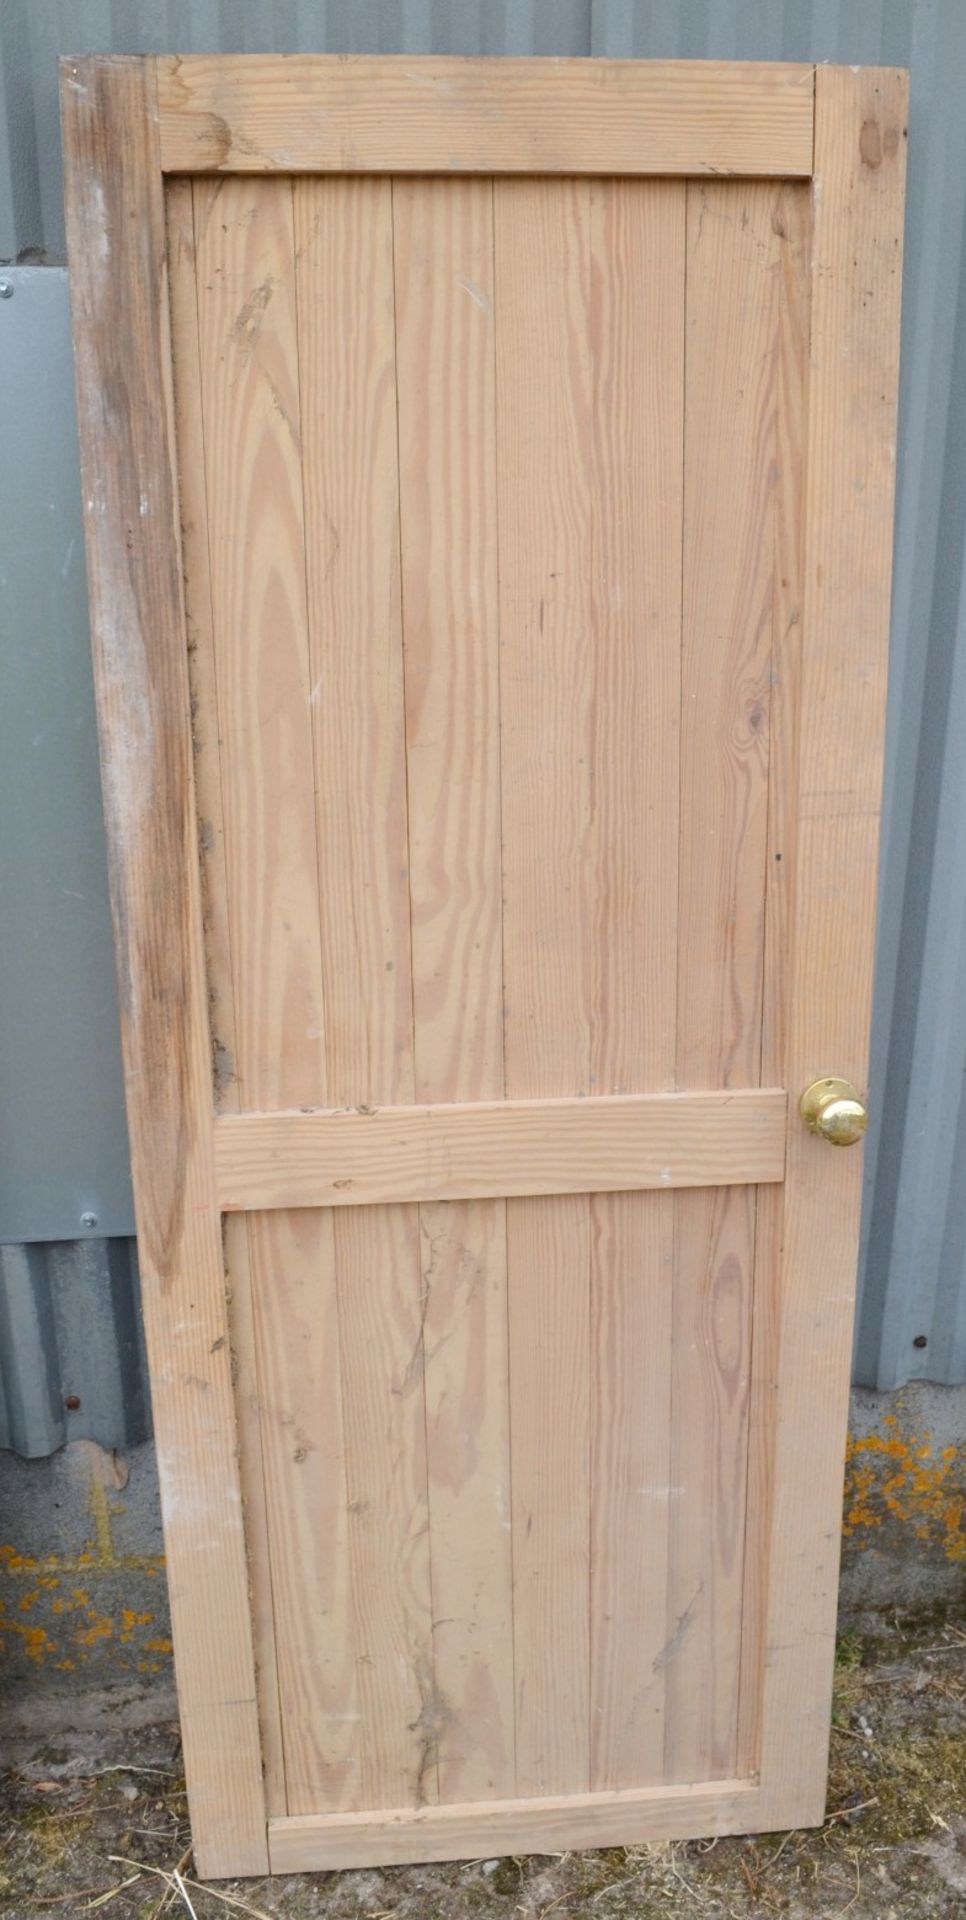 Set Of 4 x Reclaimed Wooden Doors - Taken From A Grade II Listed Property - Image 8 of 8